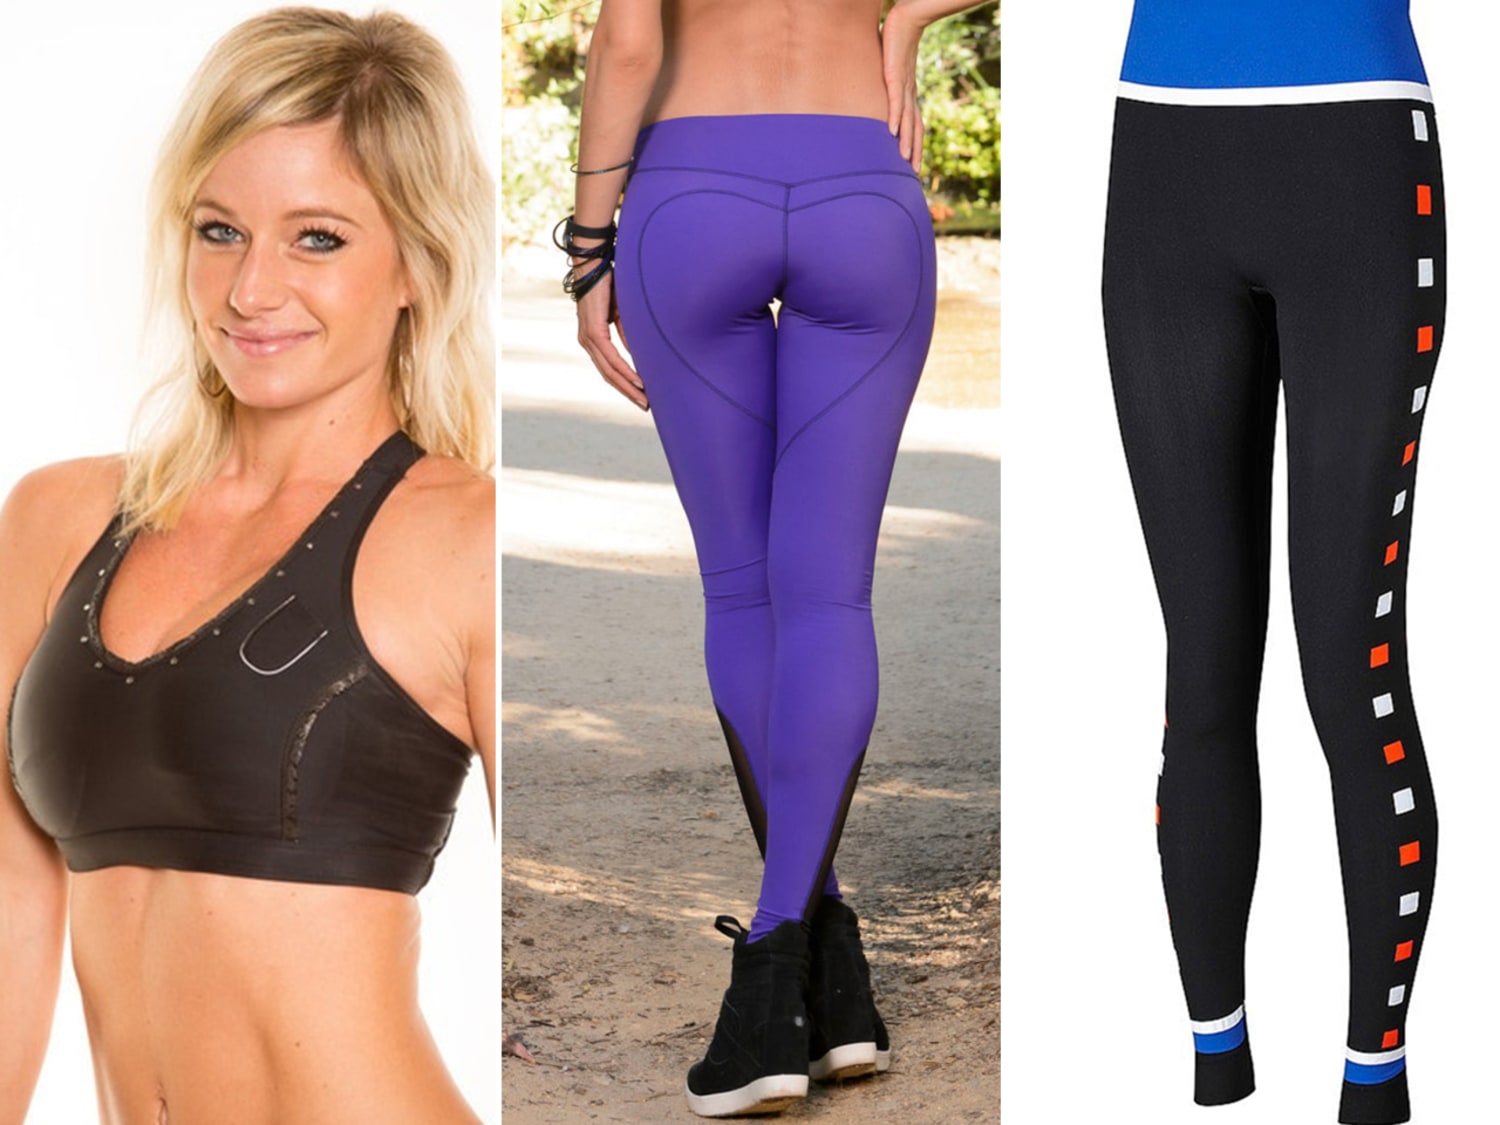 Pin on BodyRock Sport Bras, Bottoms and More!